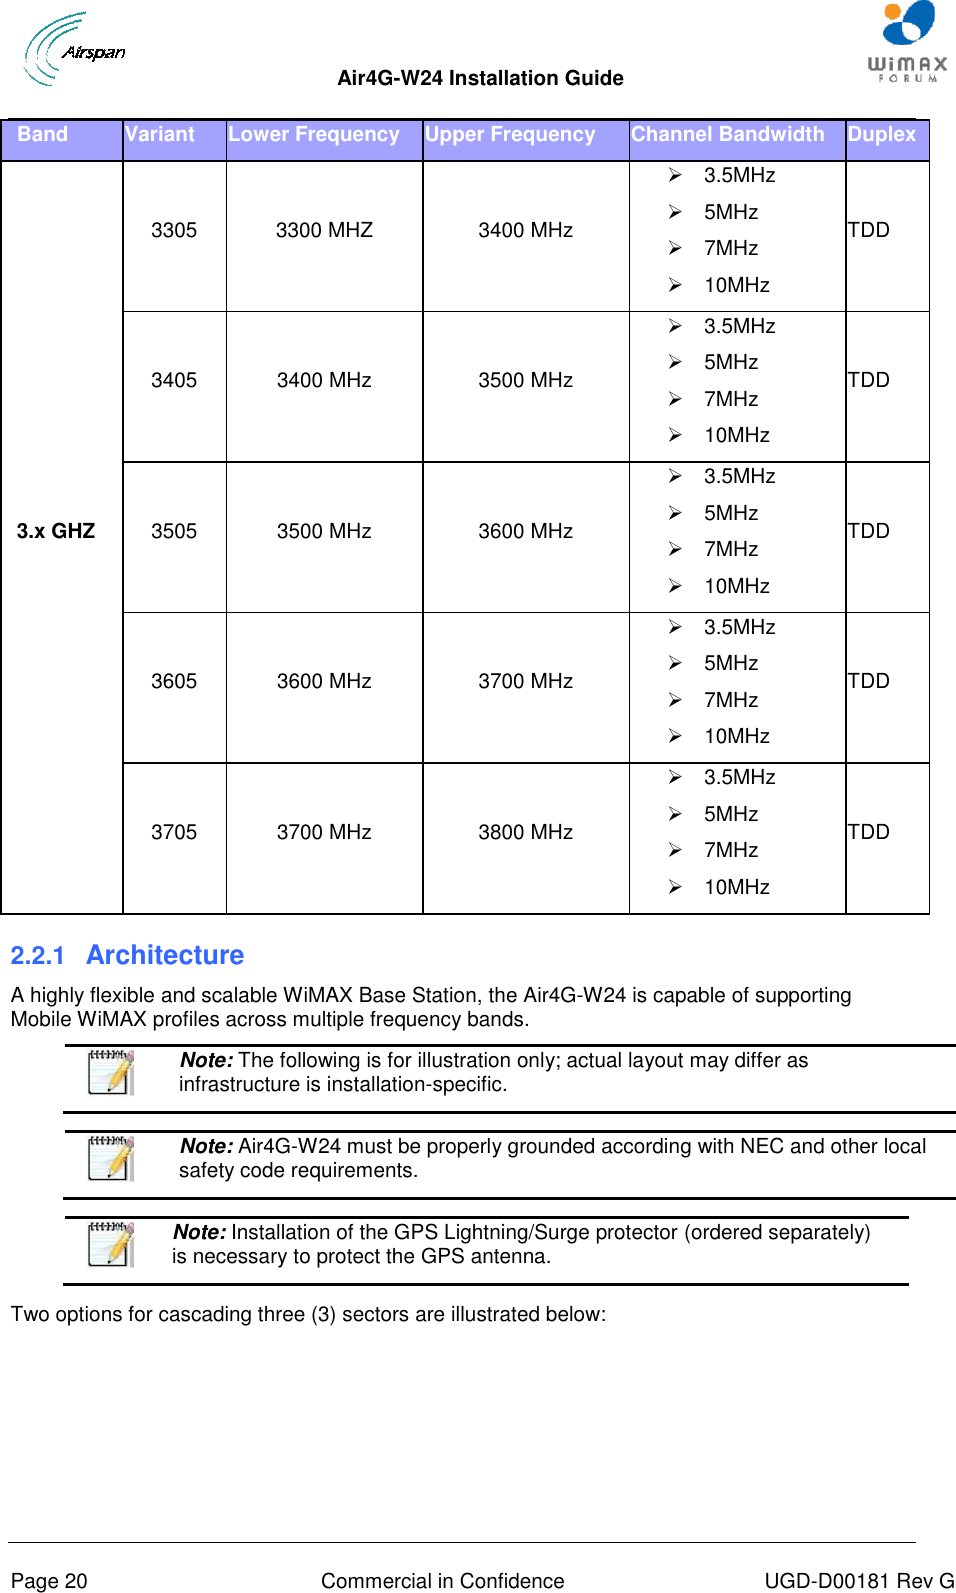  Air4G-W24 Installation Guide       Page 20  Commercial in Confidence  UGD-D00181 Rev G Band Variant Lower Frequency Upper Frequency Channel Bandwidth Duplex 3.x GHZ 3305 3300 MHZ 3400 MHz   3.5MHz   5MHz   7MHz   10MHz TDD 3405 3400 MHz 3500 MHz   3.5MHz   5MHz   7MHz   10MHz TDD 3505 3500 MHz 3600 MHz   3.5MHz   5MHz   7MHz   10MHz TDD 3605 3600 MHz 3700 MHz   3.5MHz   5MHz   7MHz   10MHz TDD 3705 3700 MHz 3800 MHz   3.5MHz   5MHz   7MHz   10MHz TDD 2.2.1  Architecture A highly flexible and scalable WiMAX Base Station, the Air4G-W24 is capable of supporting Mobile WiMAX profiles across multiple frequency bands.   Note: The following is for illustration only; actual layout may differ as infrastructure is installation-specific.    Note: Air4G-W24 must be properly grounded according with NEC and other local safety code requirements.   Note: Installation of the GPS Lightning/Surge protector (ordered separately) is necessary to protect the GPS antenna.  Two options for cascading three (3) sectors are illustrated below: 